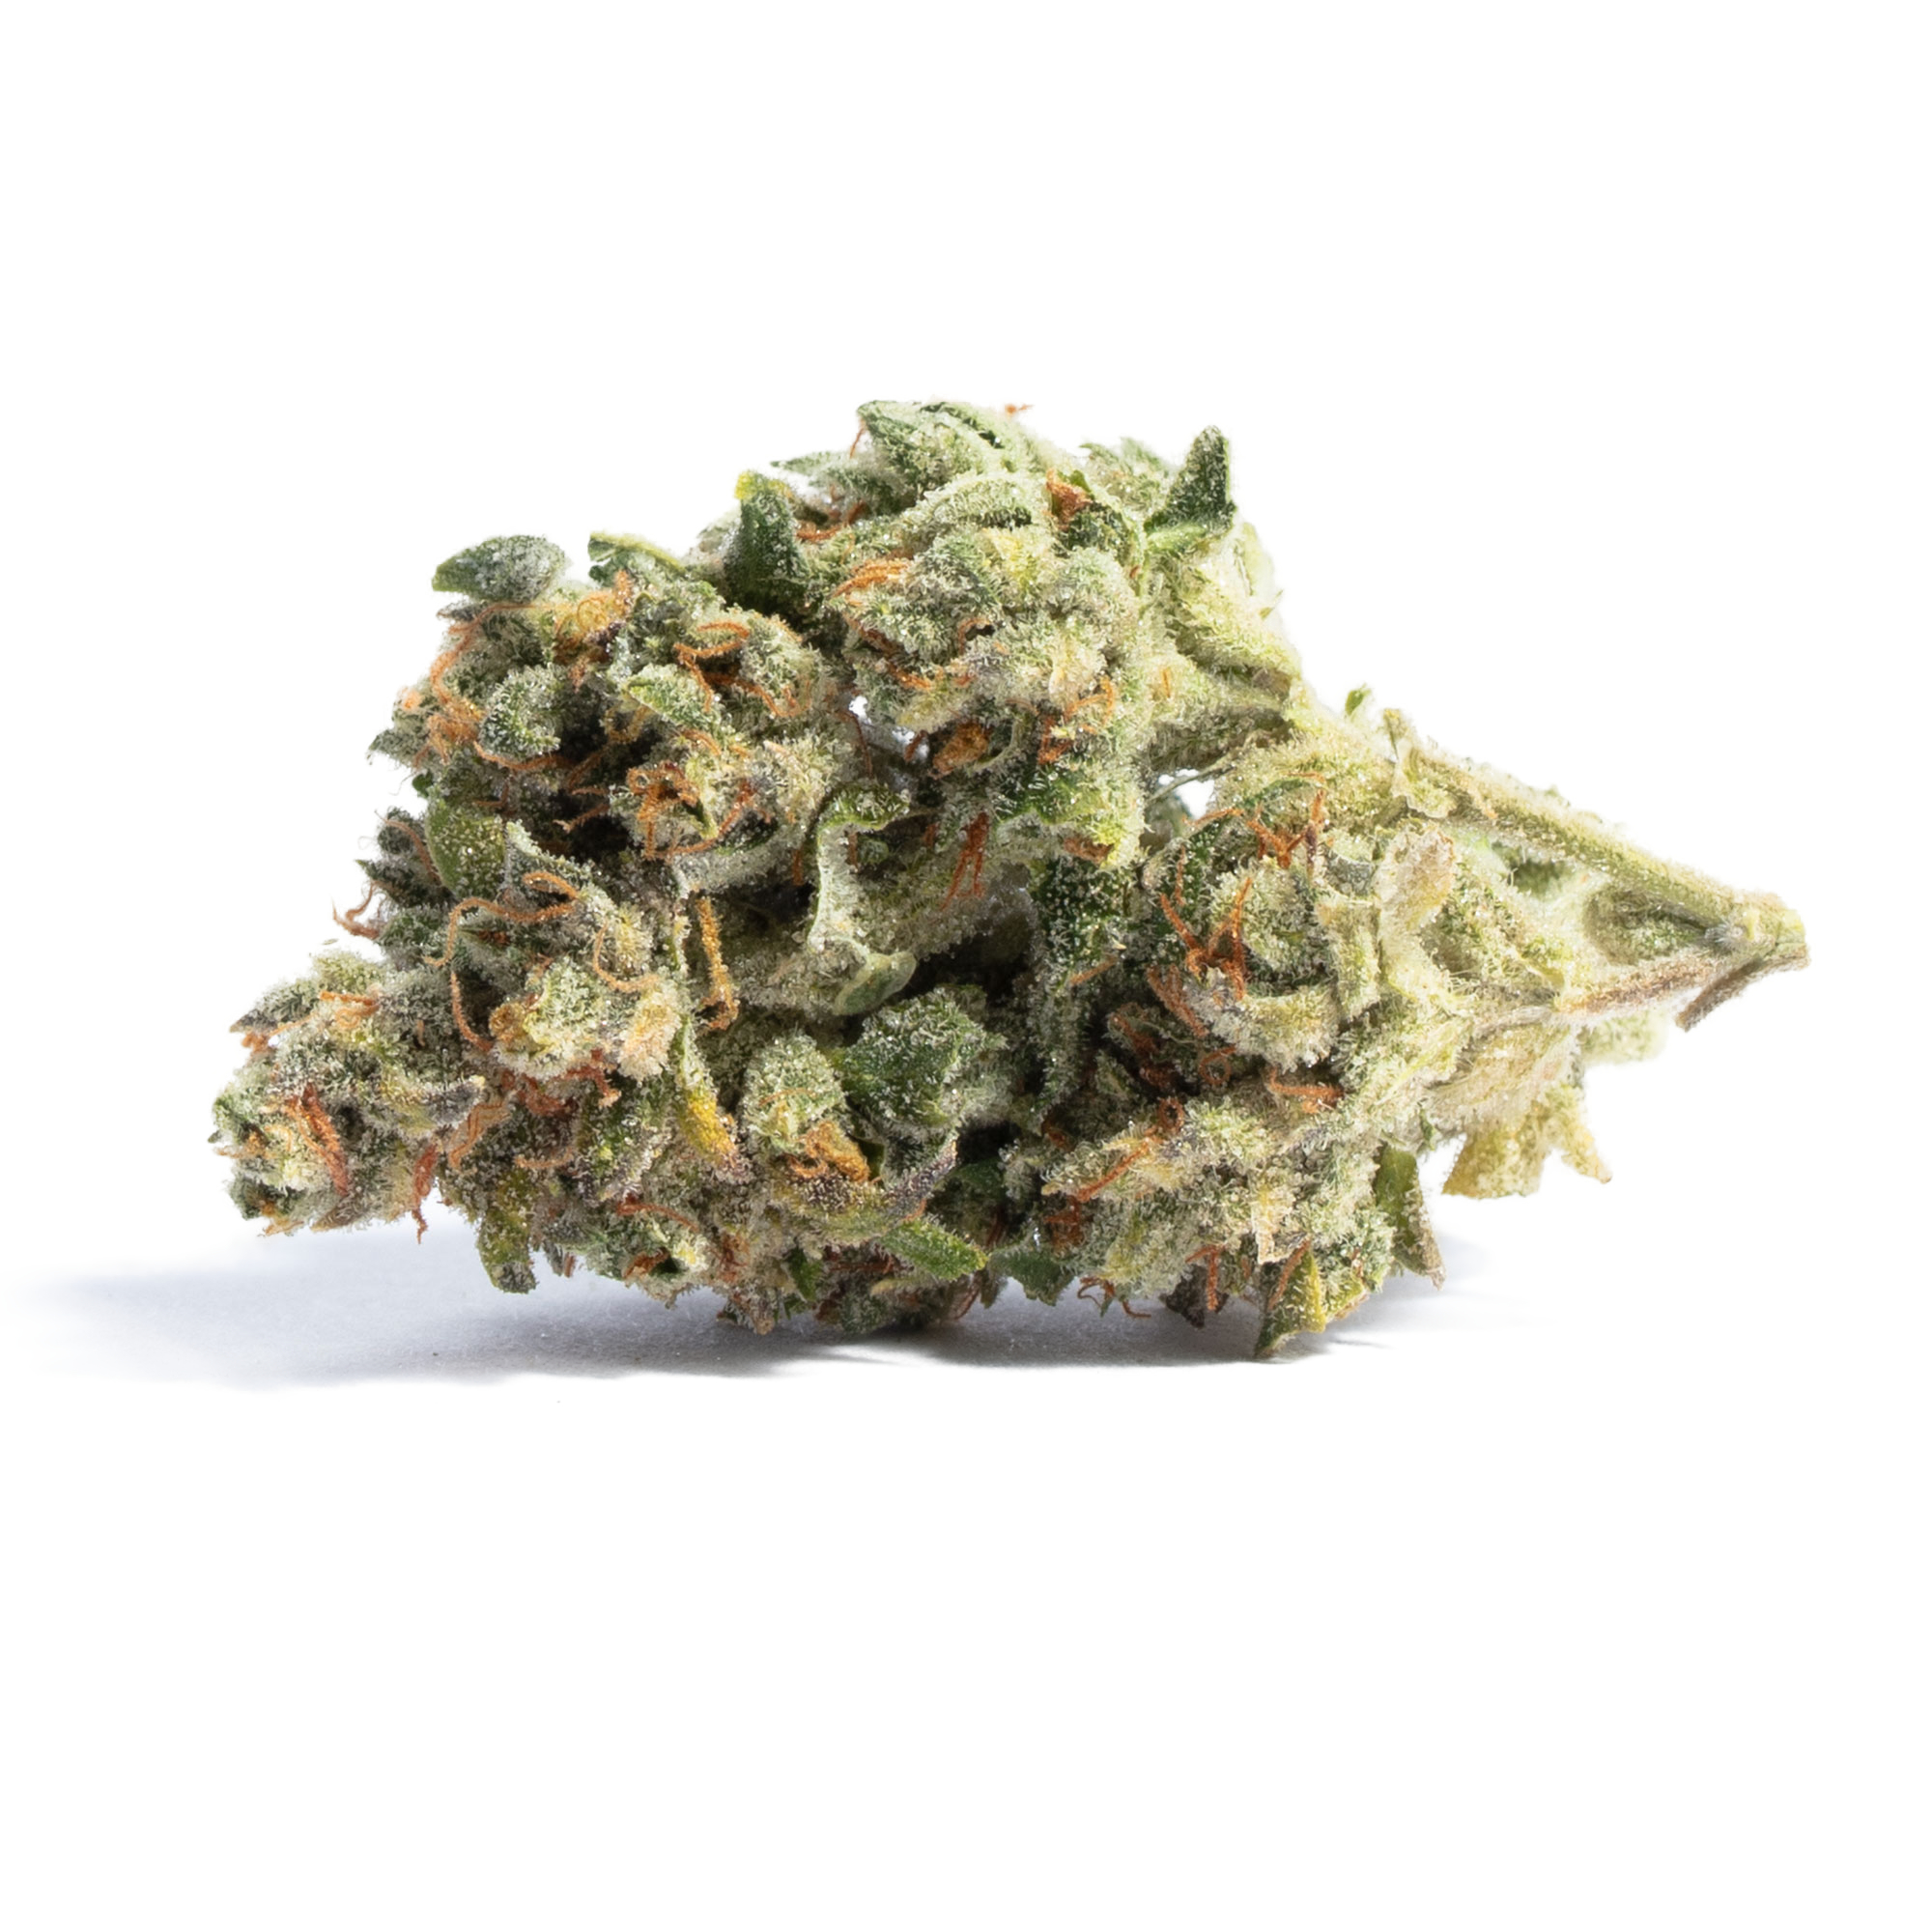 Acapulco Gold weed